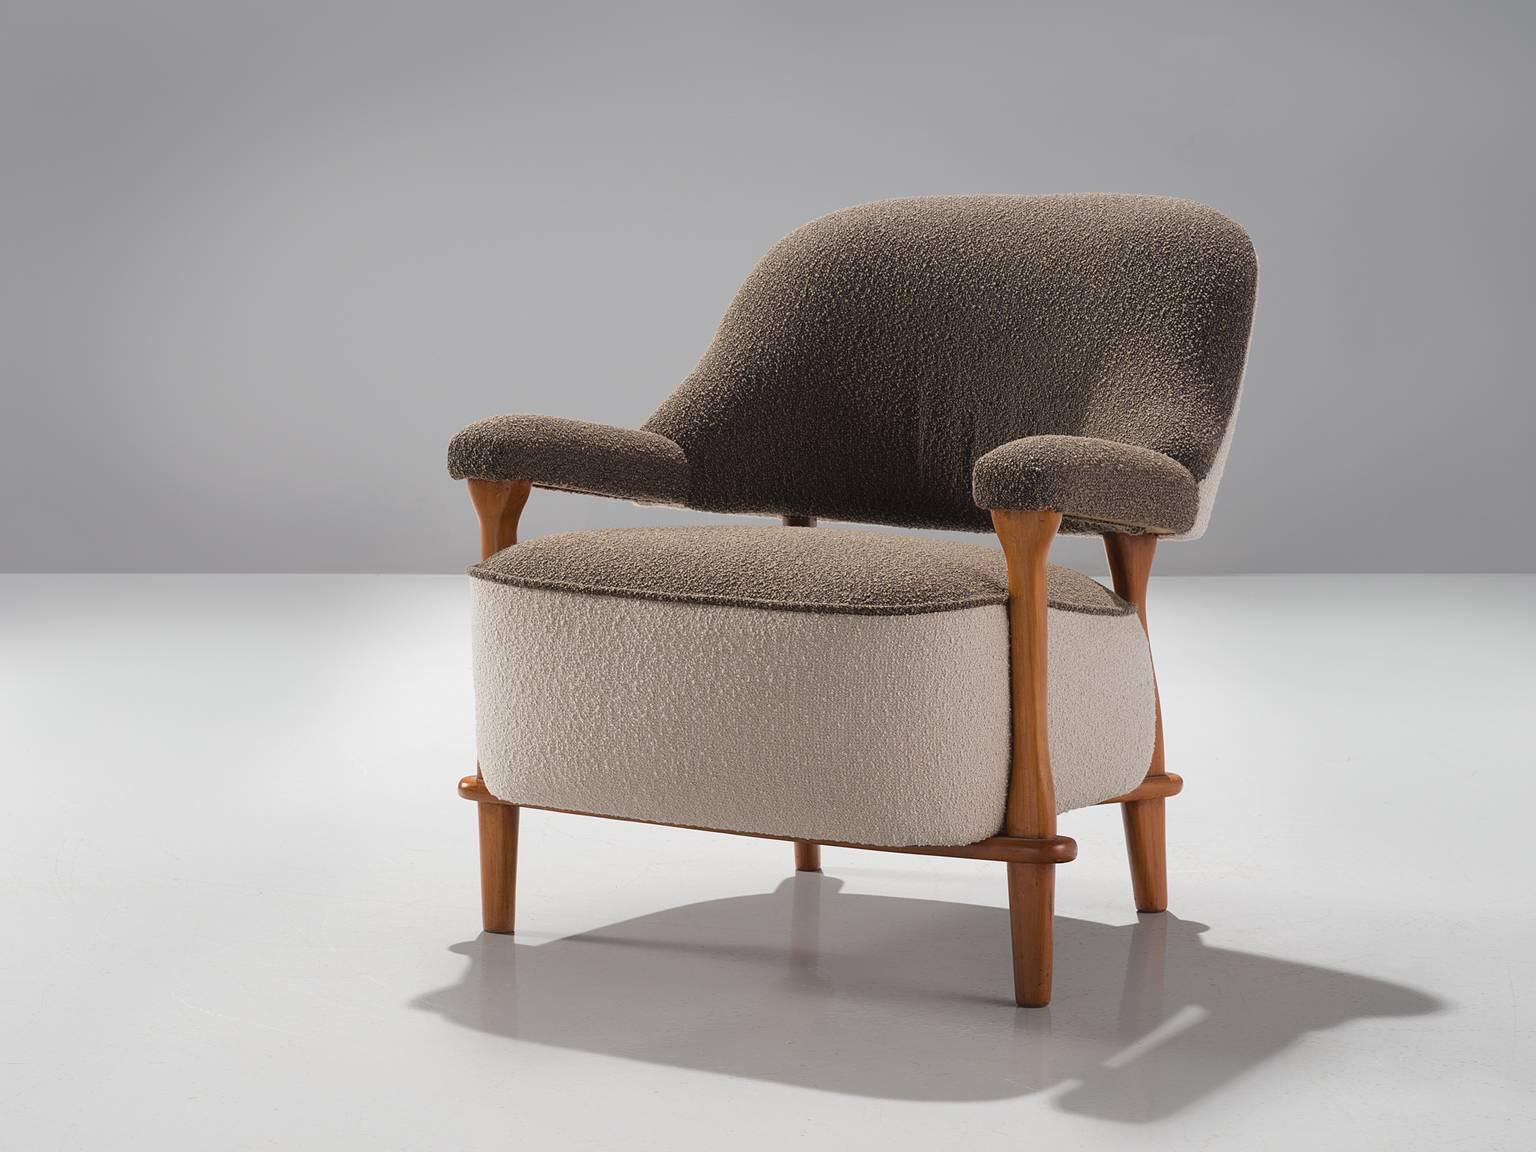 Theo Ruth for Artifort, grey and white fabric and beech, 1950s.

This white and grey voluptuous armchair by Theo Ruth (1915-) is a very strong singular item. The back flows with a natural grace into the armrest. The open gap between the backrest and